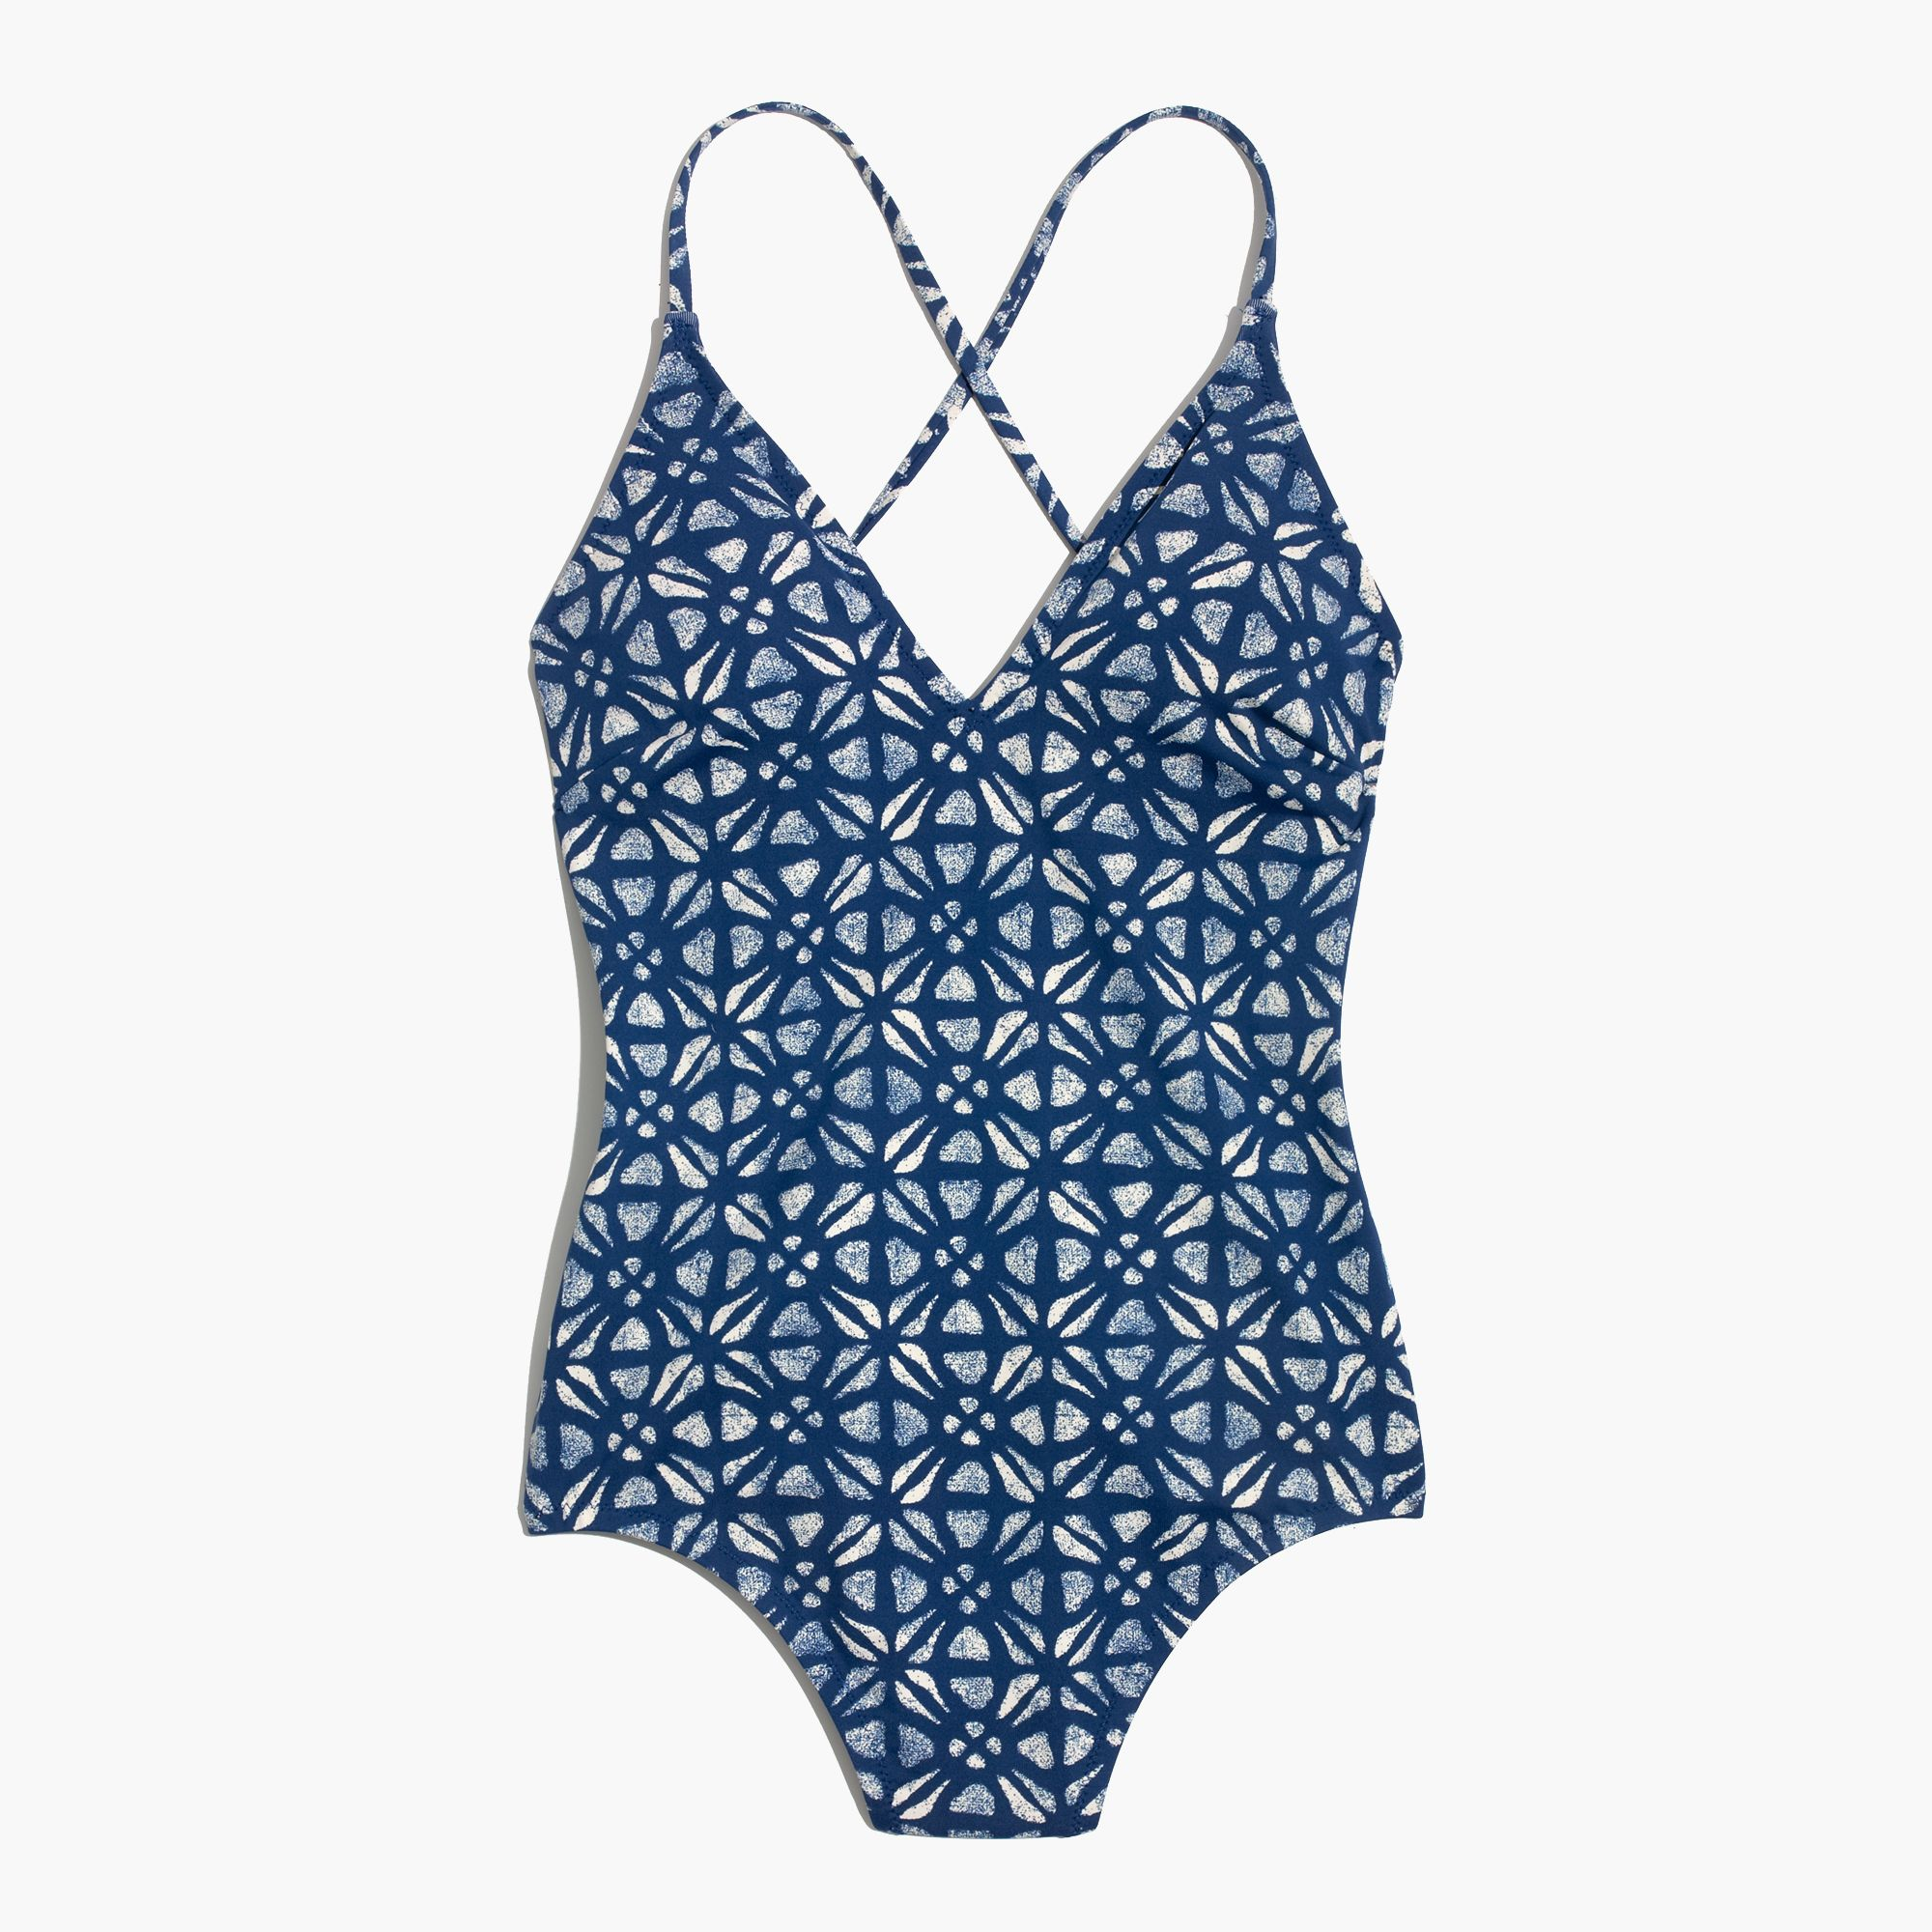 Lyst - Madewell Tie-back One-piece Swimsuit In Iris Stamp in Blue